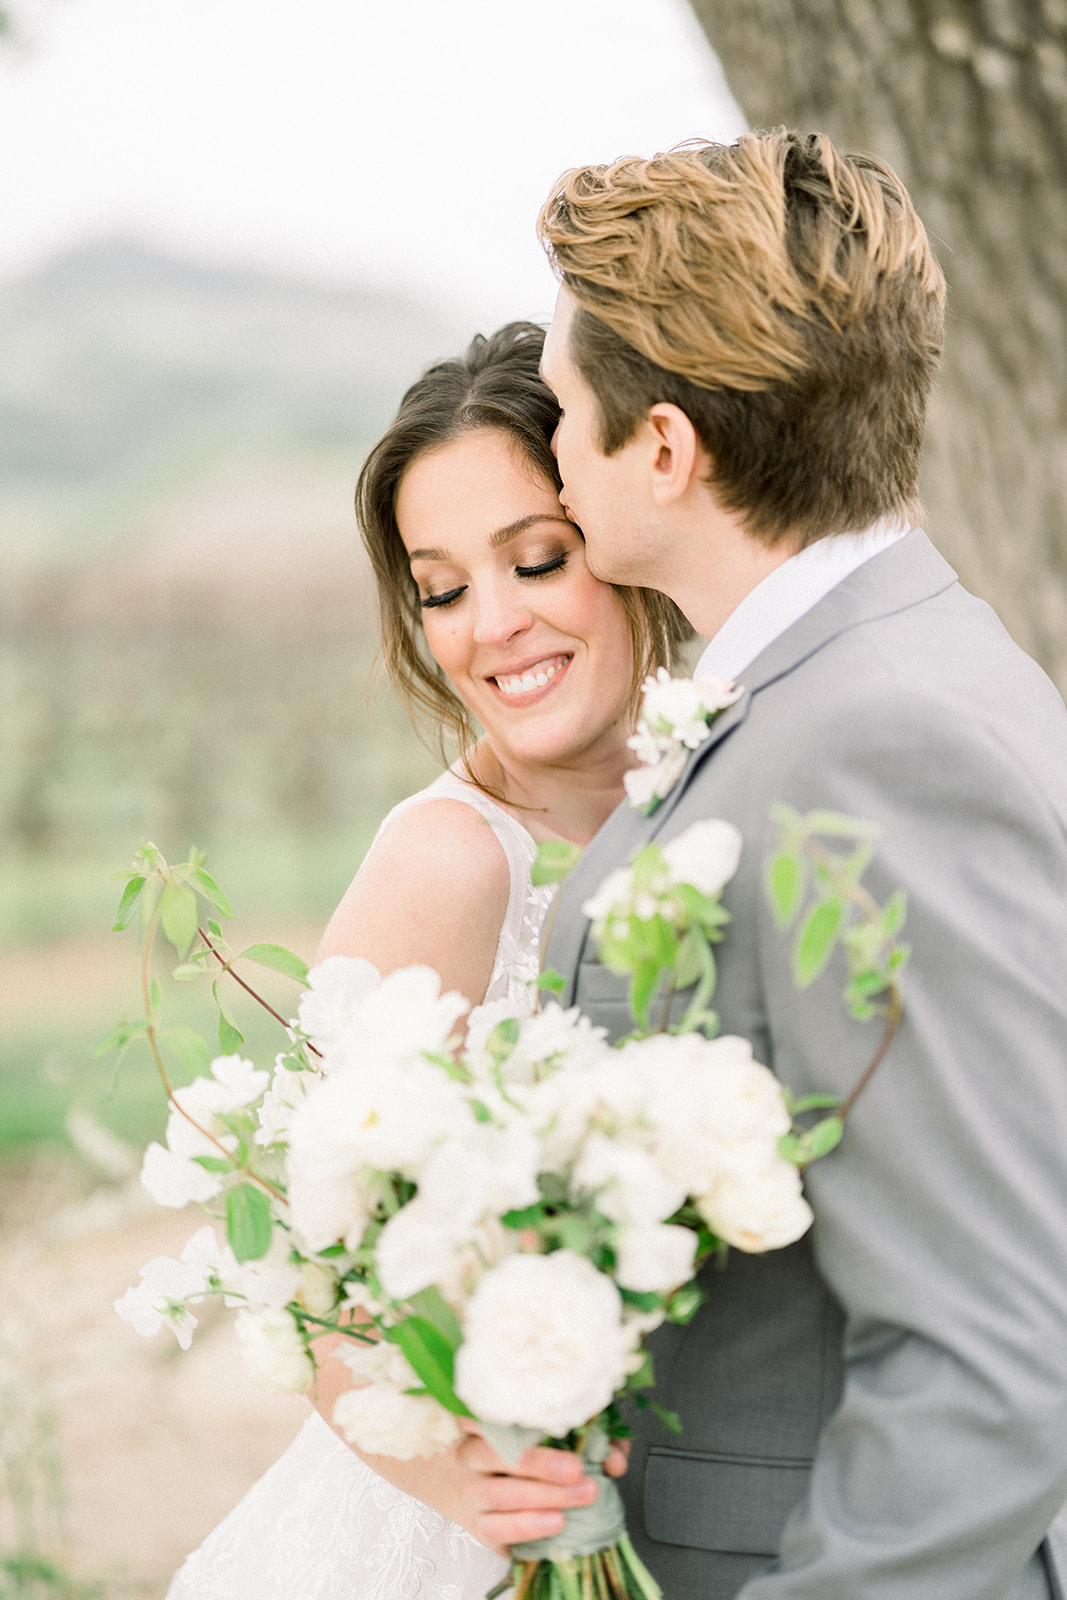 Intimate moment between newlyweds at Sunstone Winery, Southern California's luxury wedding